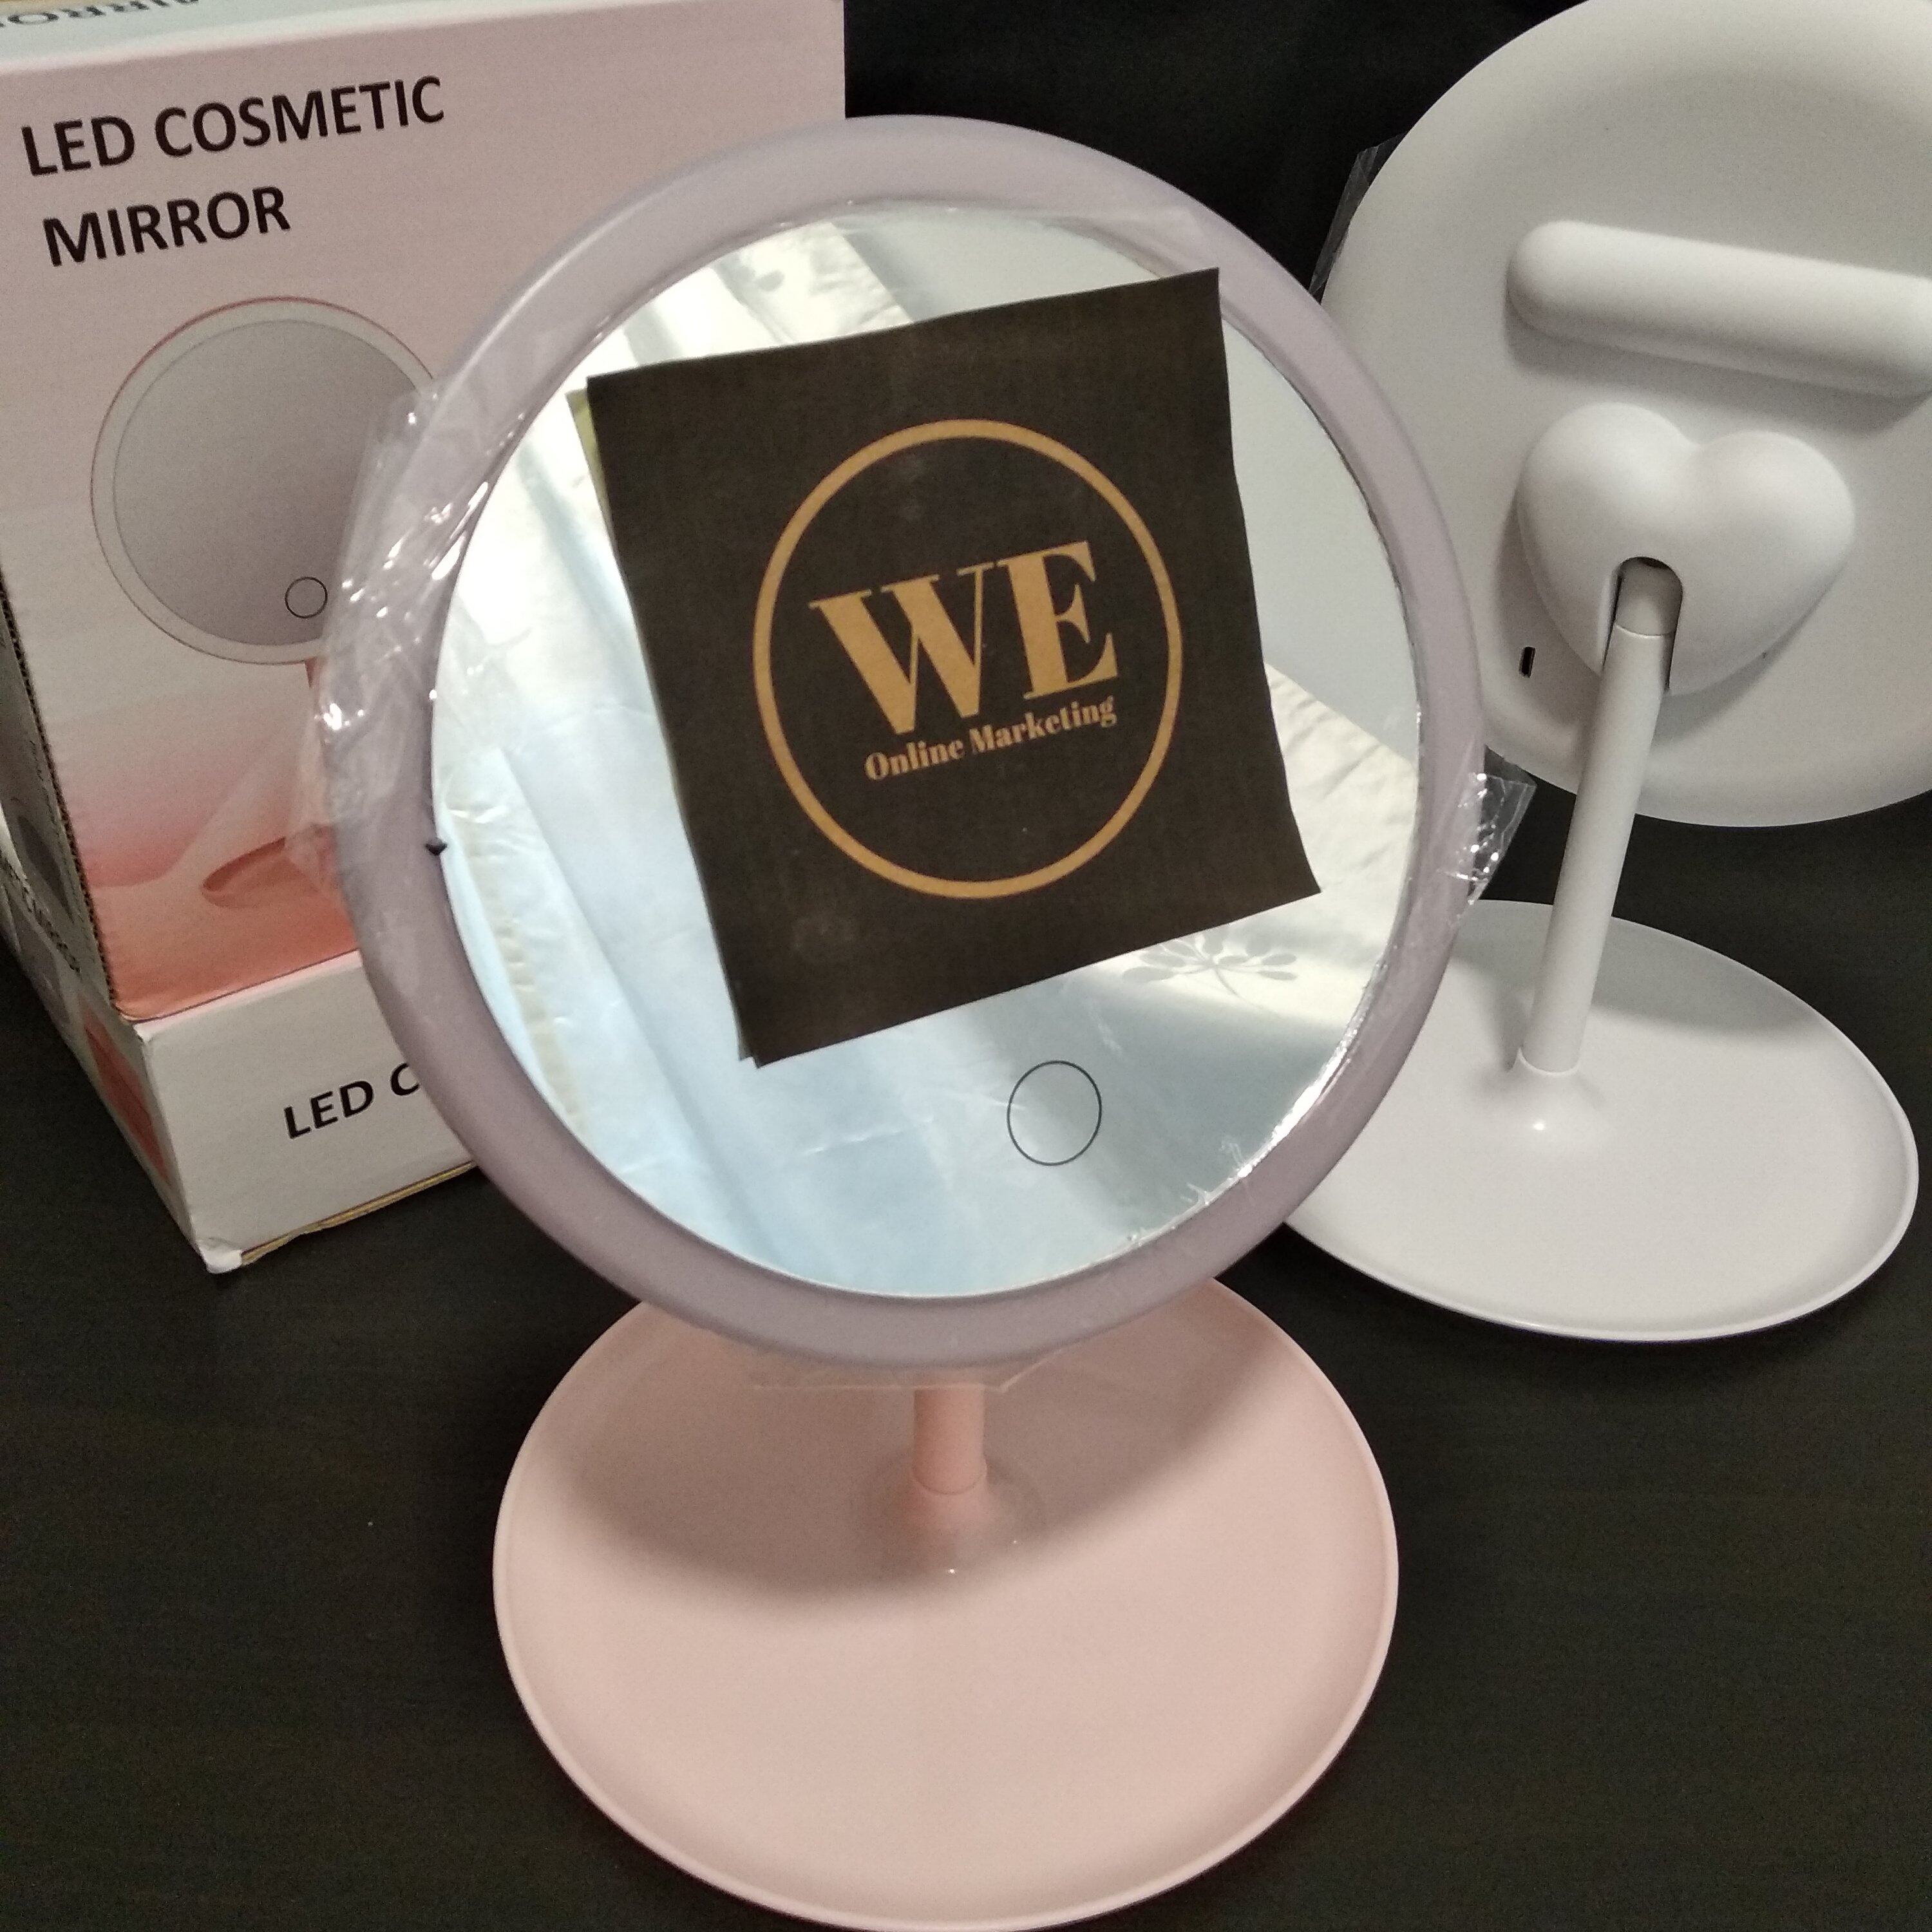 (Ready Stock) LED Makeup Mirror - Wireless Portable Cosmetic Mirror USB Rechargeable Adjustable Rotation Counter-top Mirror with Light Cermin Solek Dengan Lampu LED Lampu Cermin Solek LED Cermin LED Light Mirror